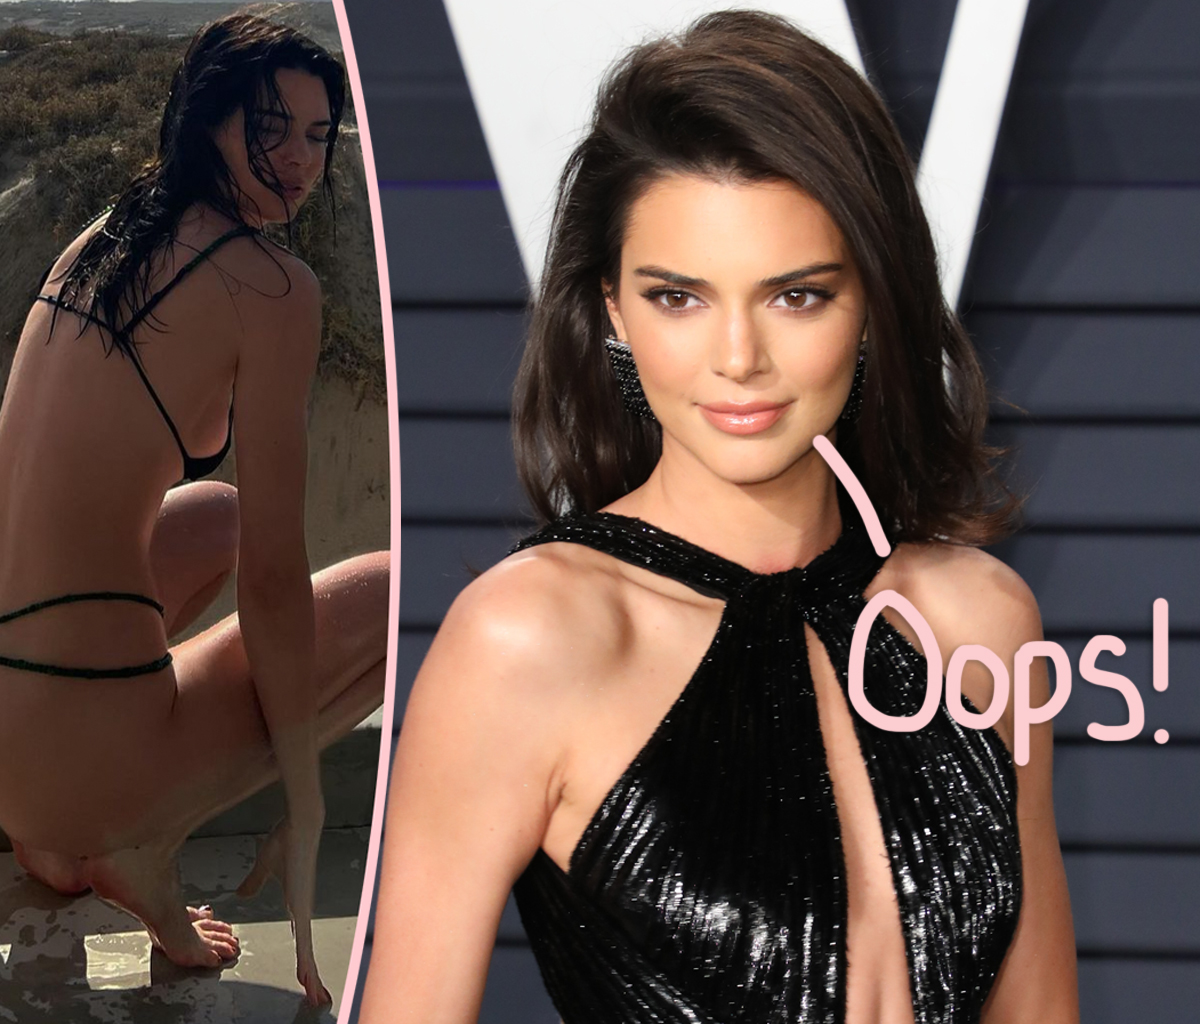 Fans Accuse Kendall Jenner Of Major Photoshop Fail In New Bikini Pictures! – Perez Hilton